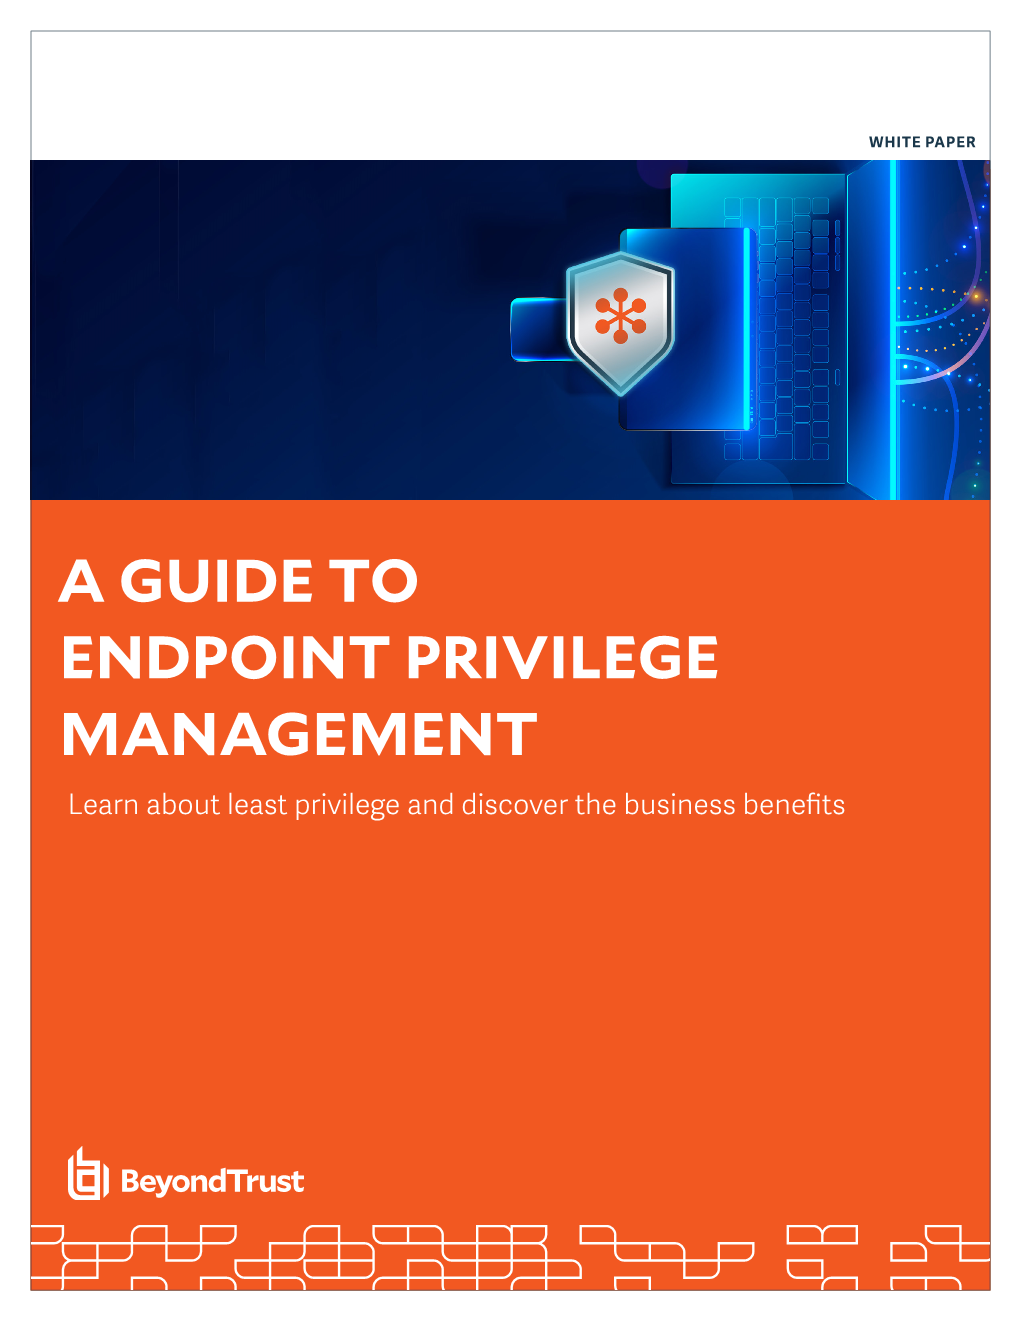 A Guide to Endpoint Privilege Management